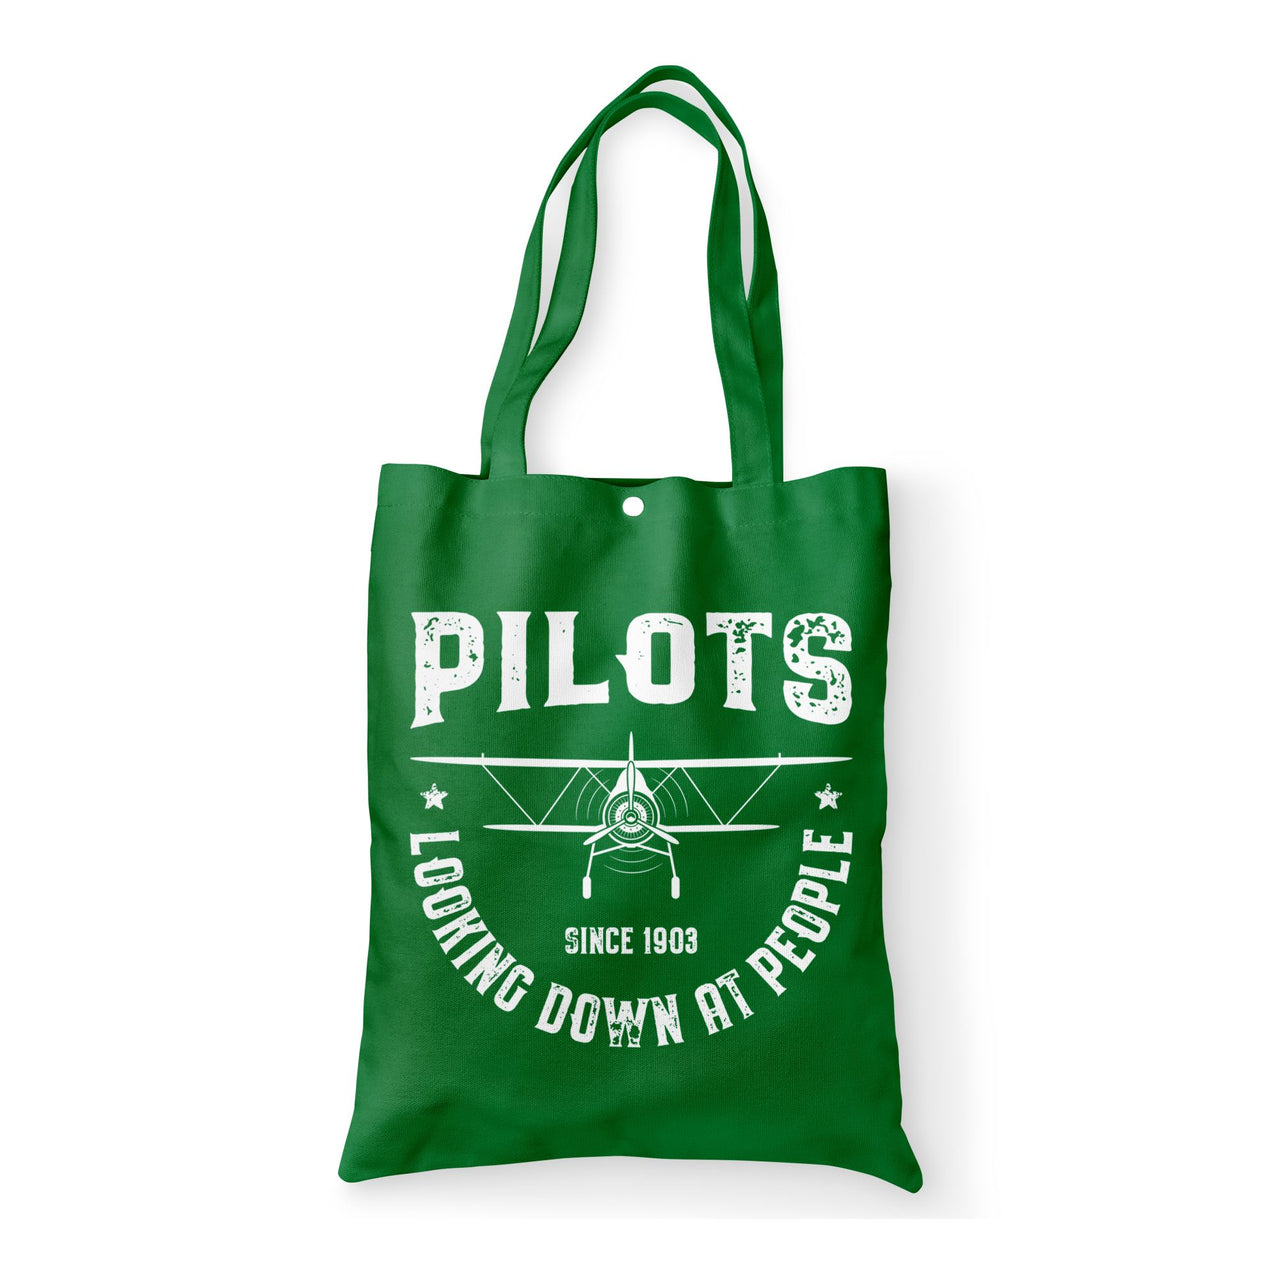 Pilots Looking Down at People Since 1903 Designed Tote Bags